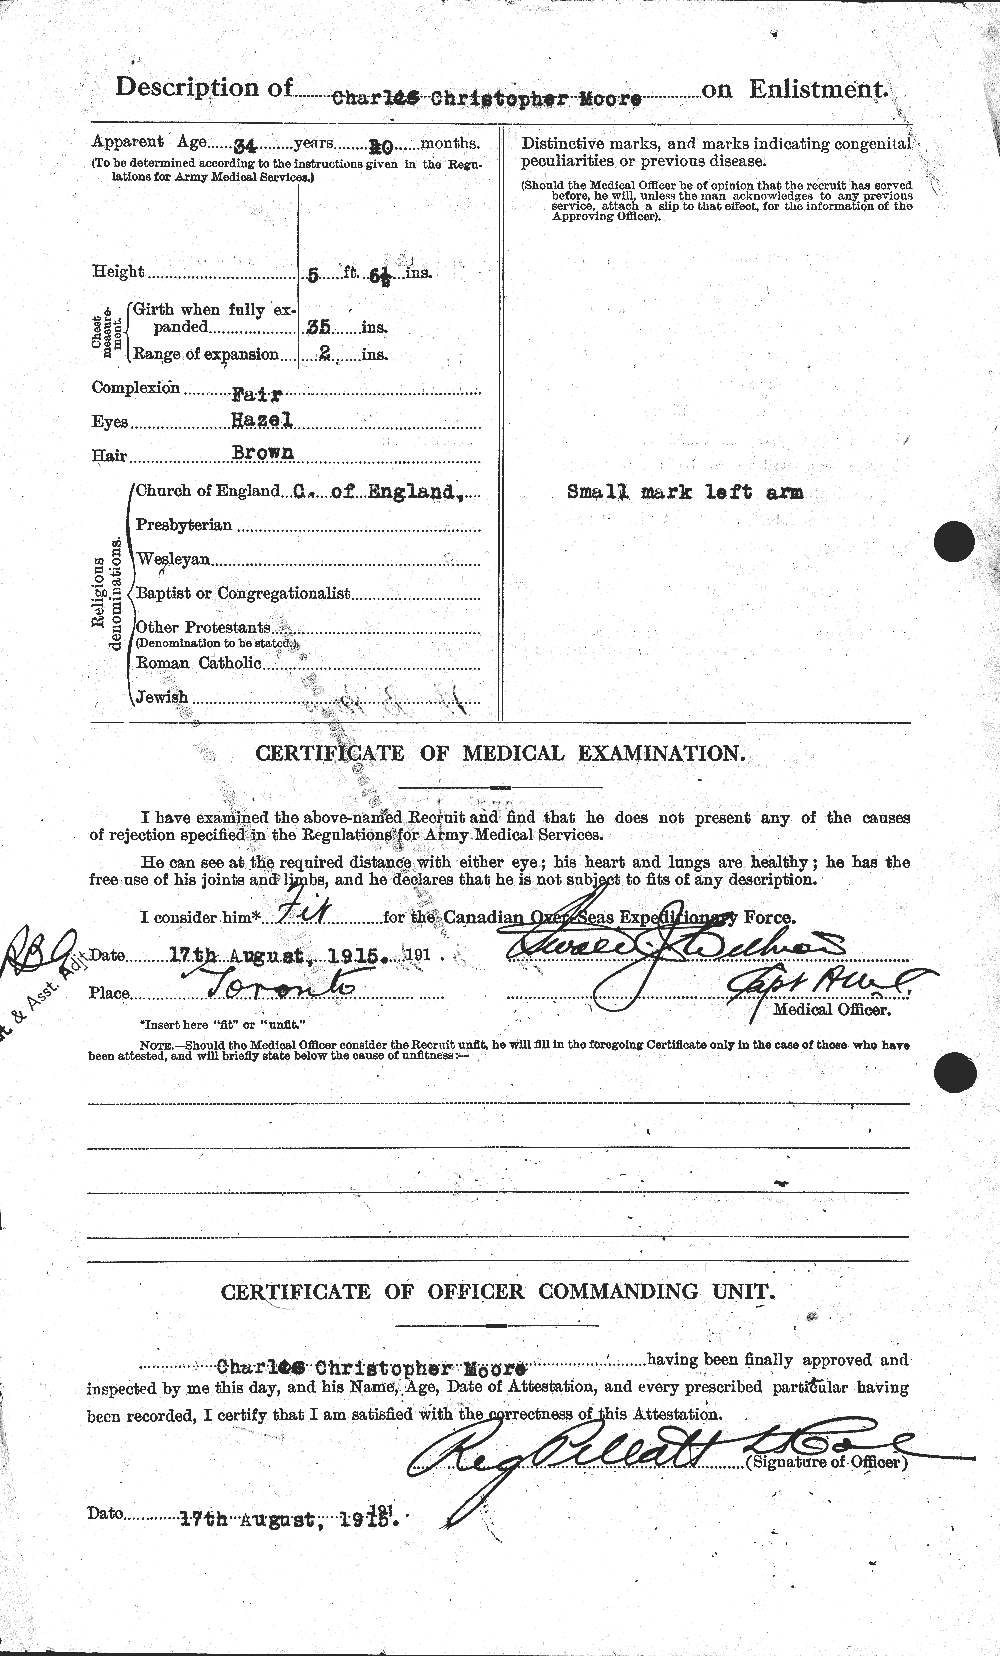 Personnel Records of the First World War - CEF 506498b